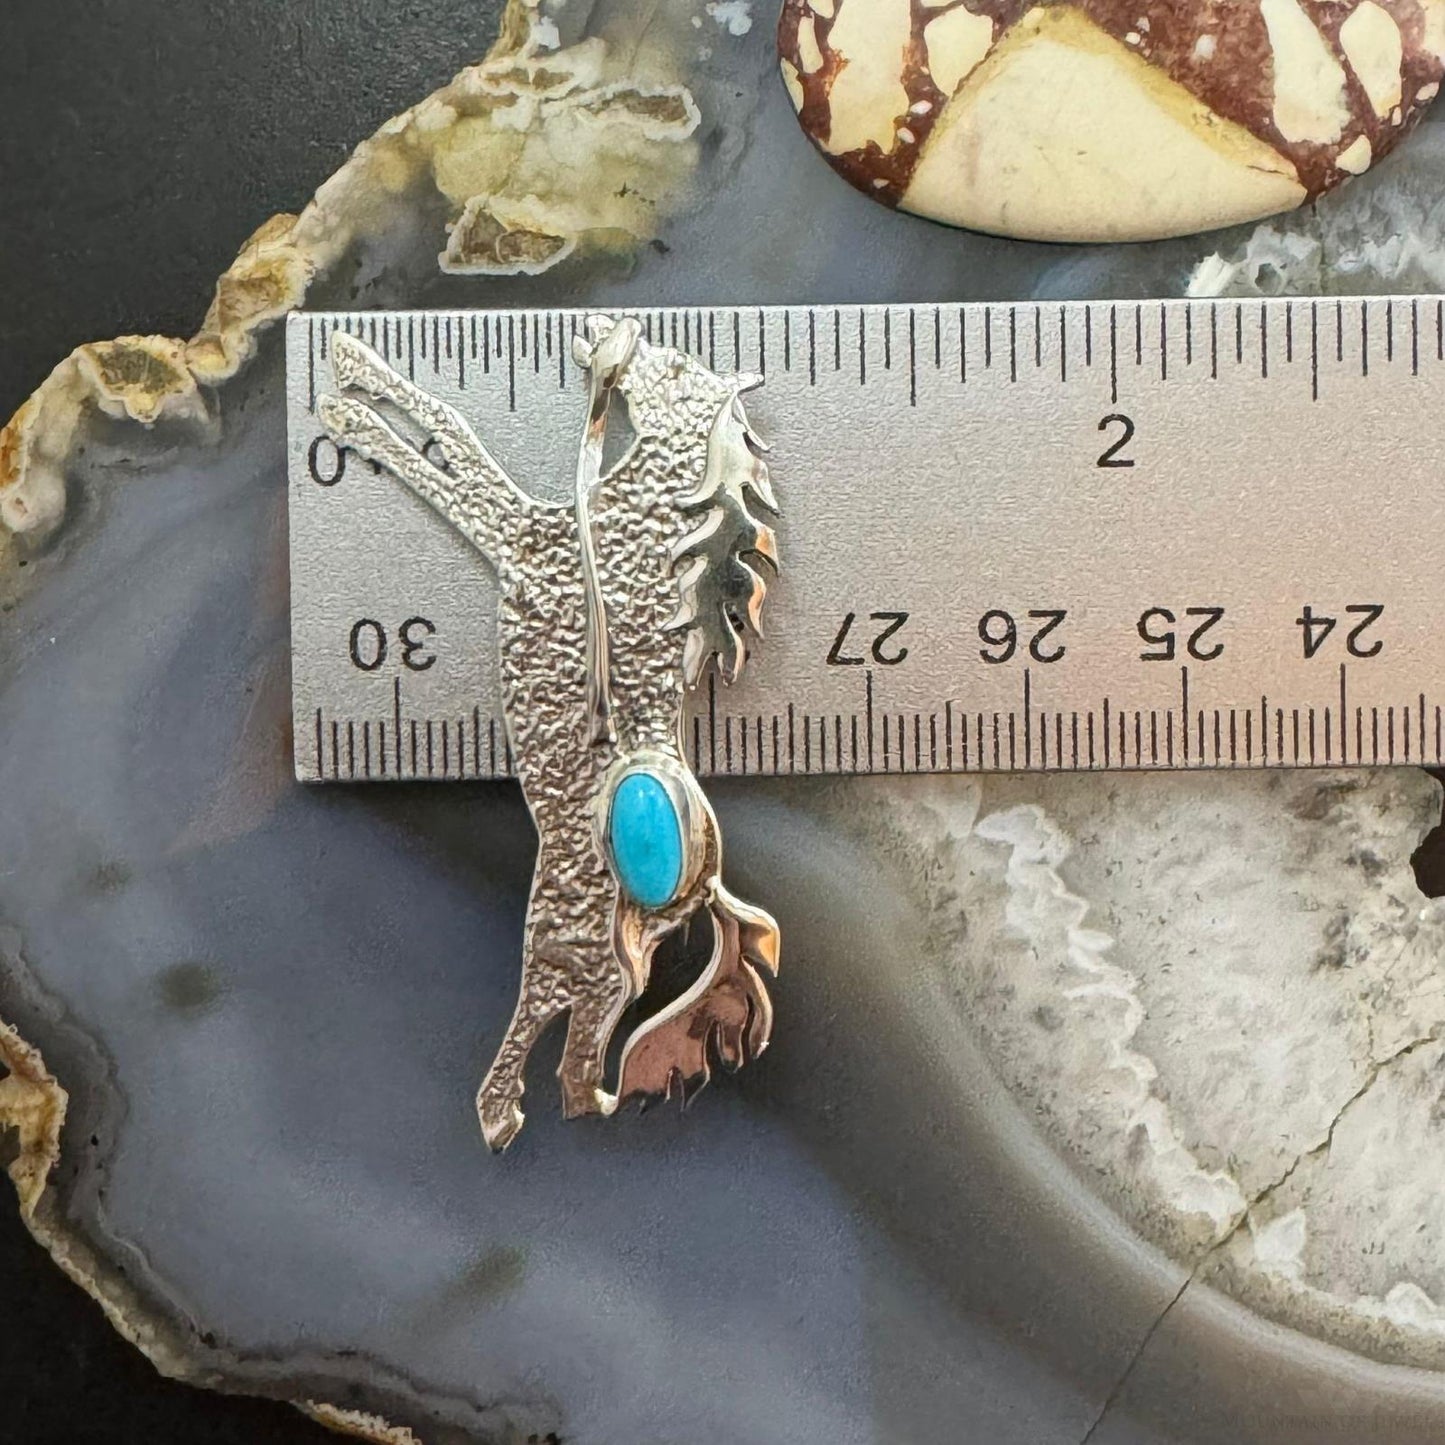 Native American Sterling Silver Sleeping Beauty Turquoise Galloping Horse Brooch For Women